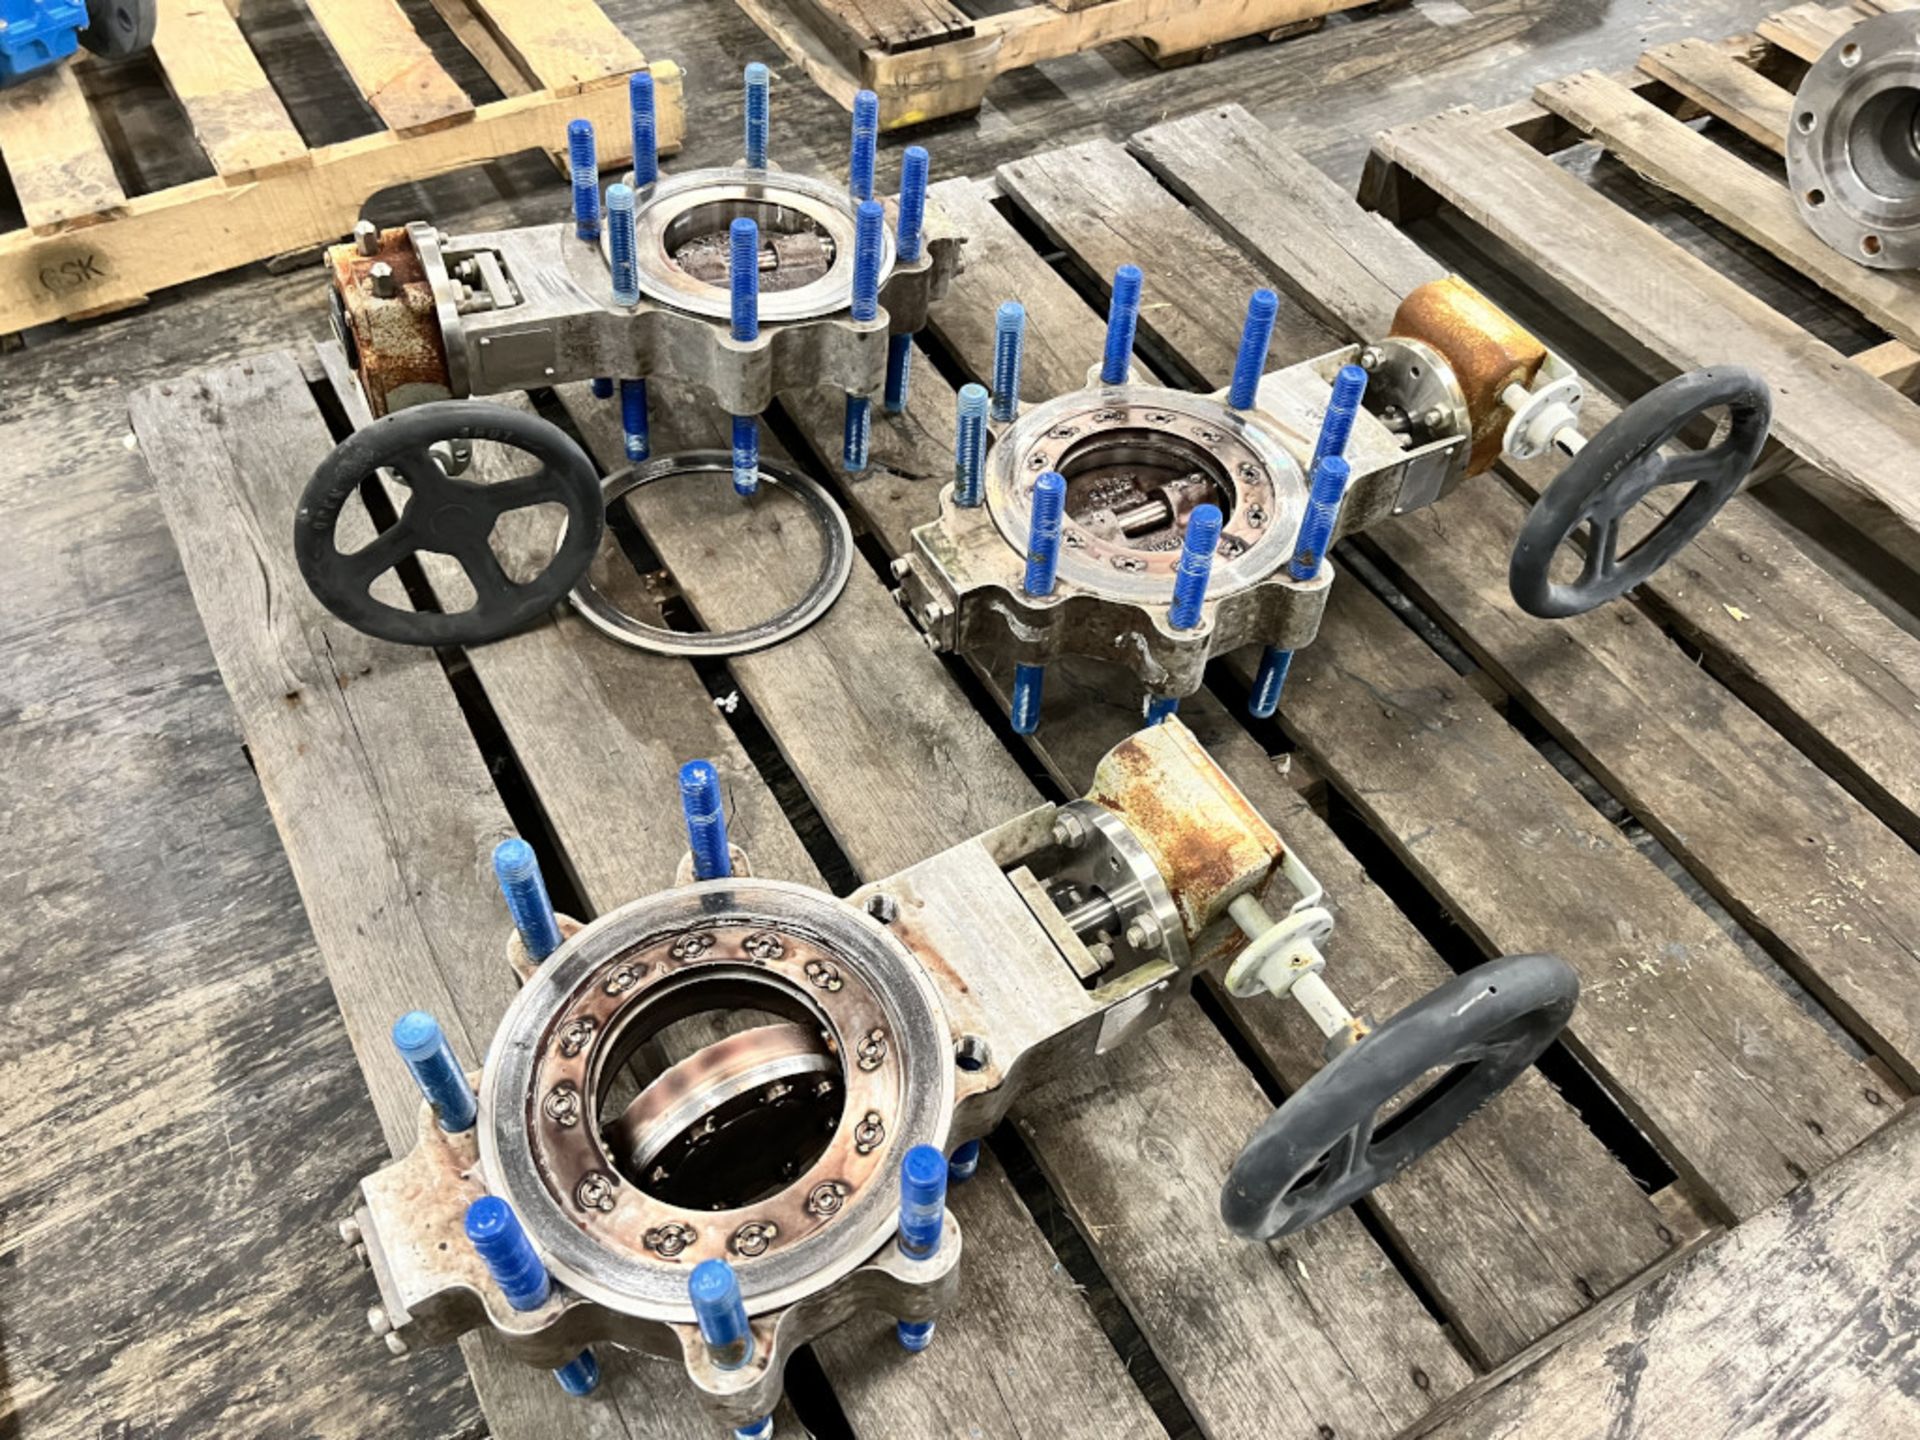 Lot of (3) Butterfly Valves w/Gears | Model No. 20063; 995 4A Body; 10237; Tag: 246061